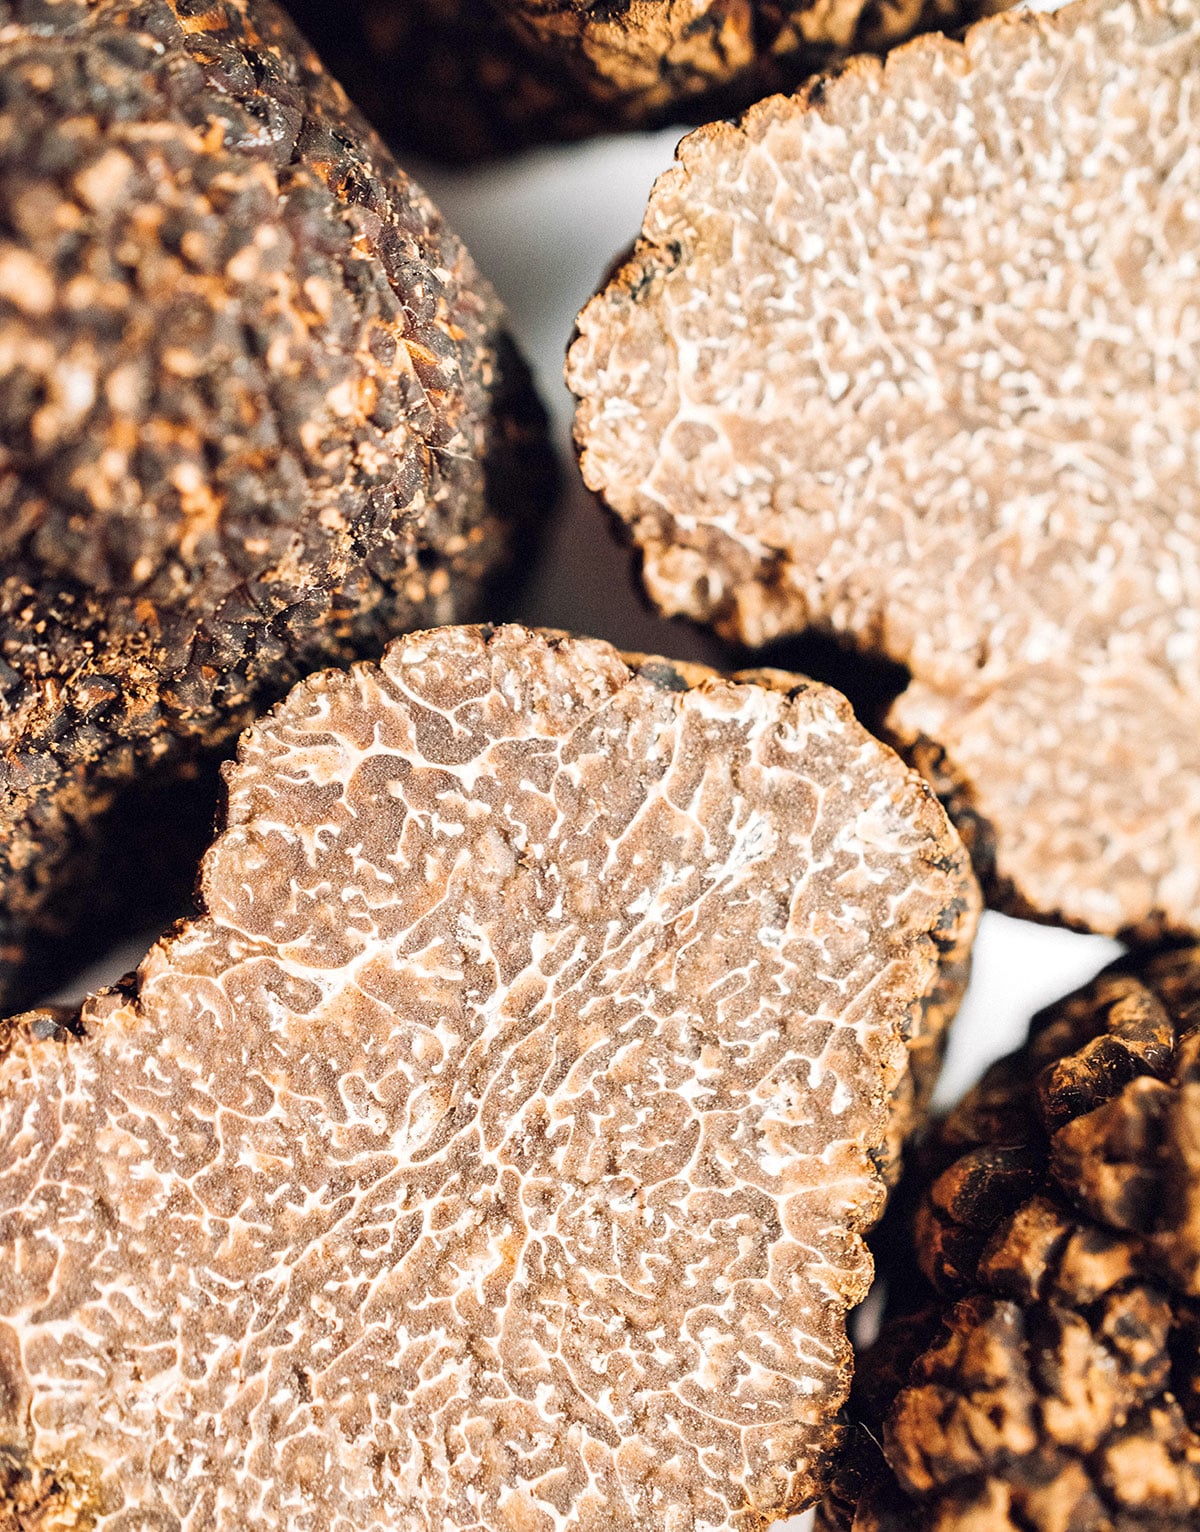 An up close view detailing the textures and colors of the inside of a truffle